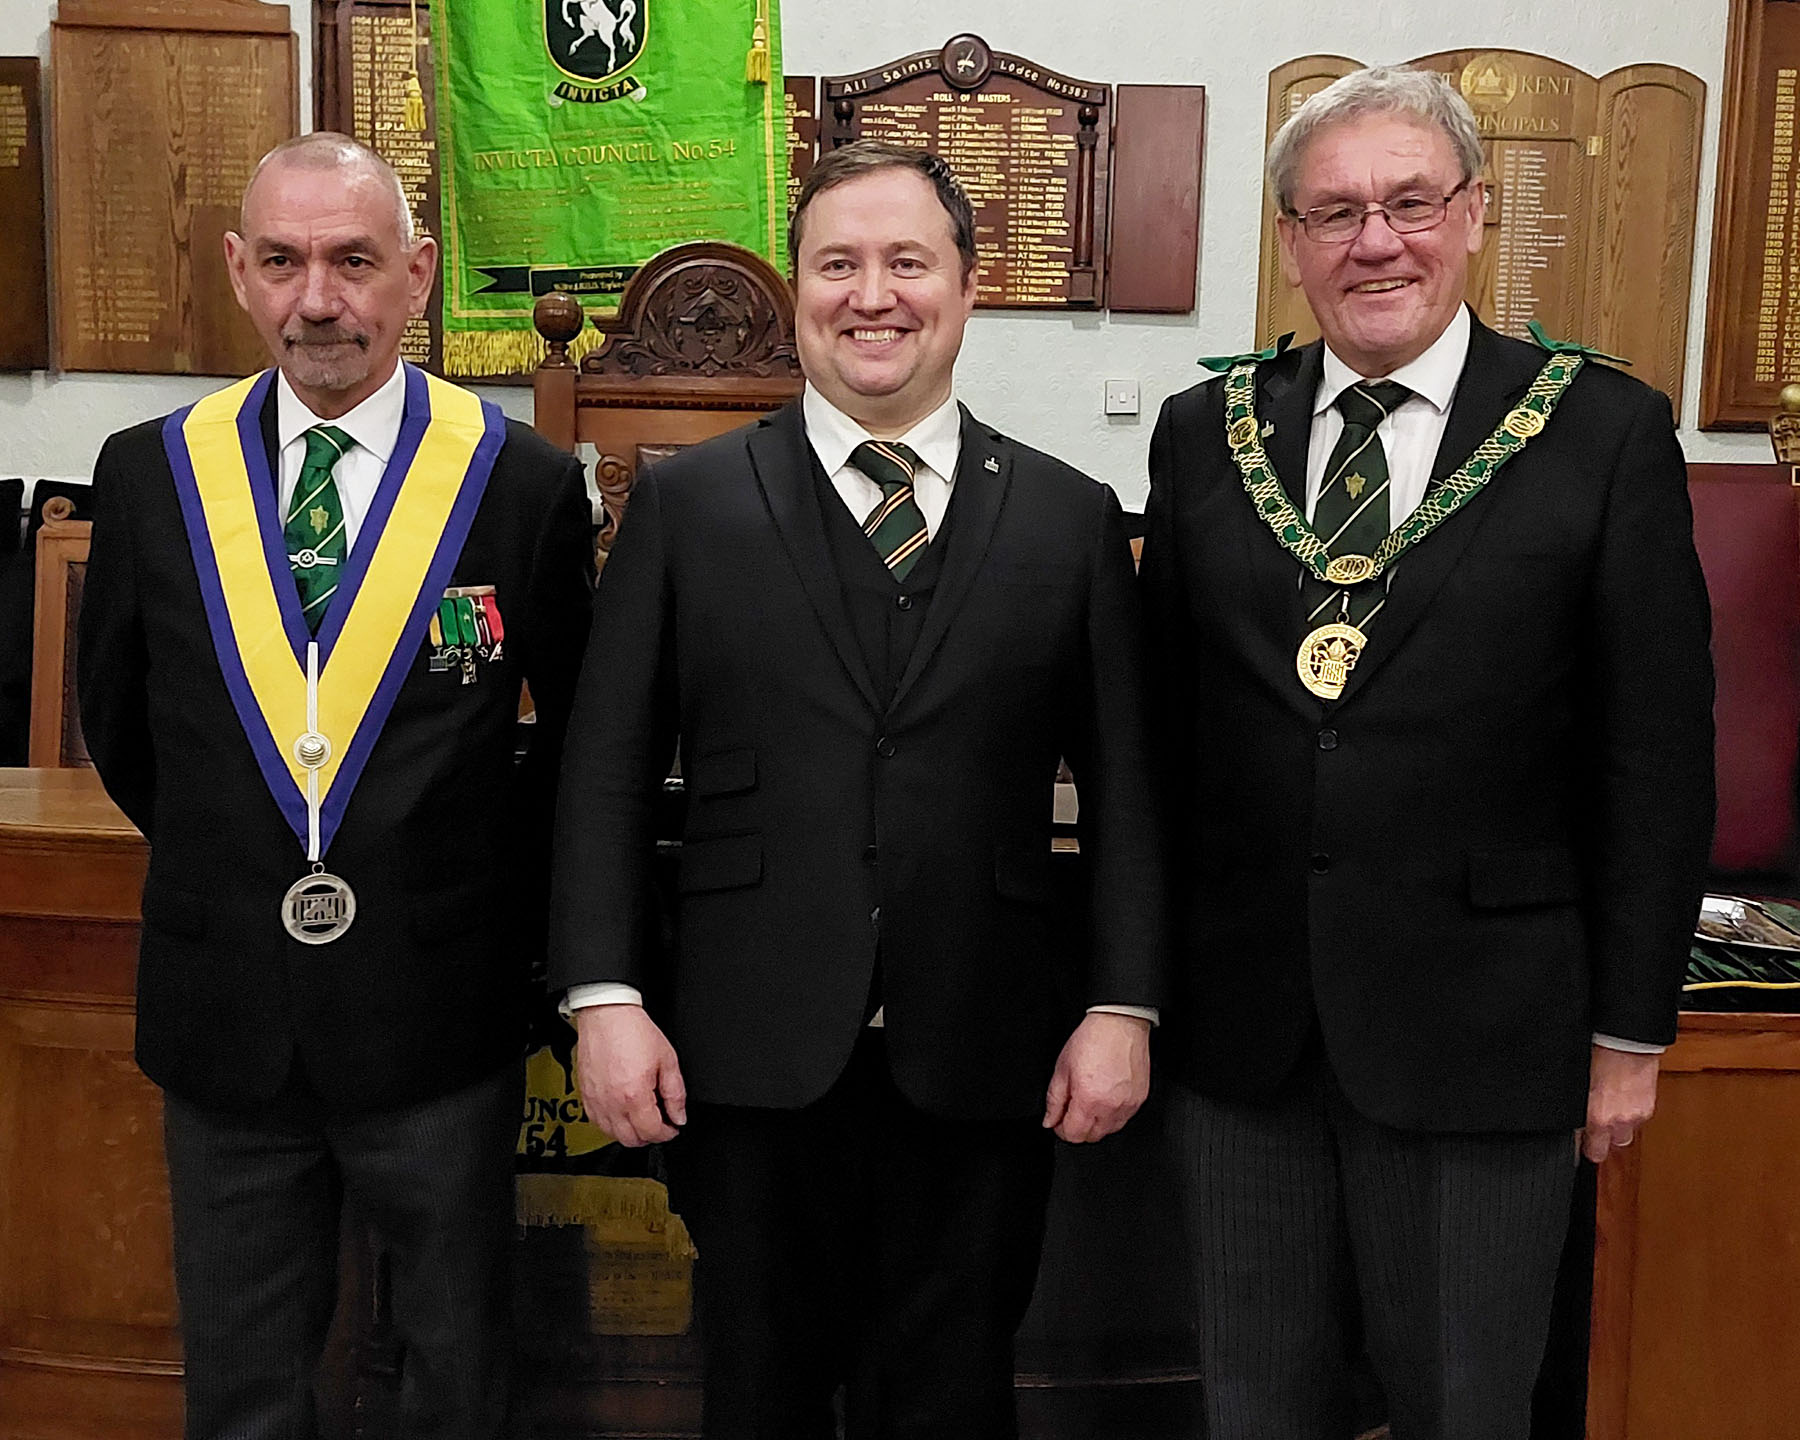 The WM W.Bro Neville Fourie with Bro. Shane Lawlor and the DGP